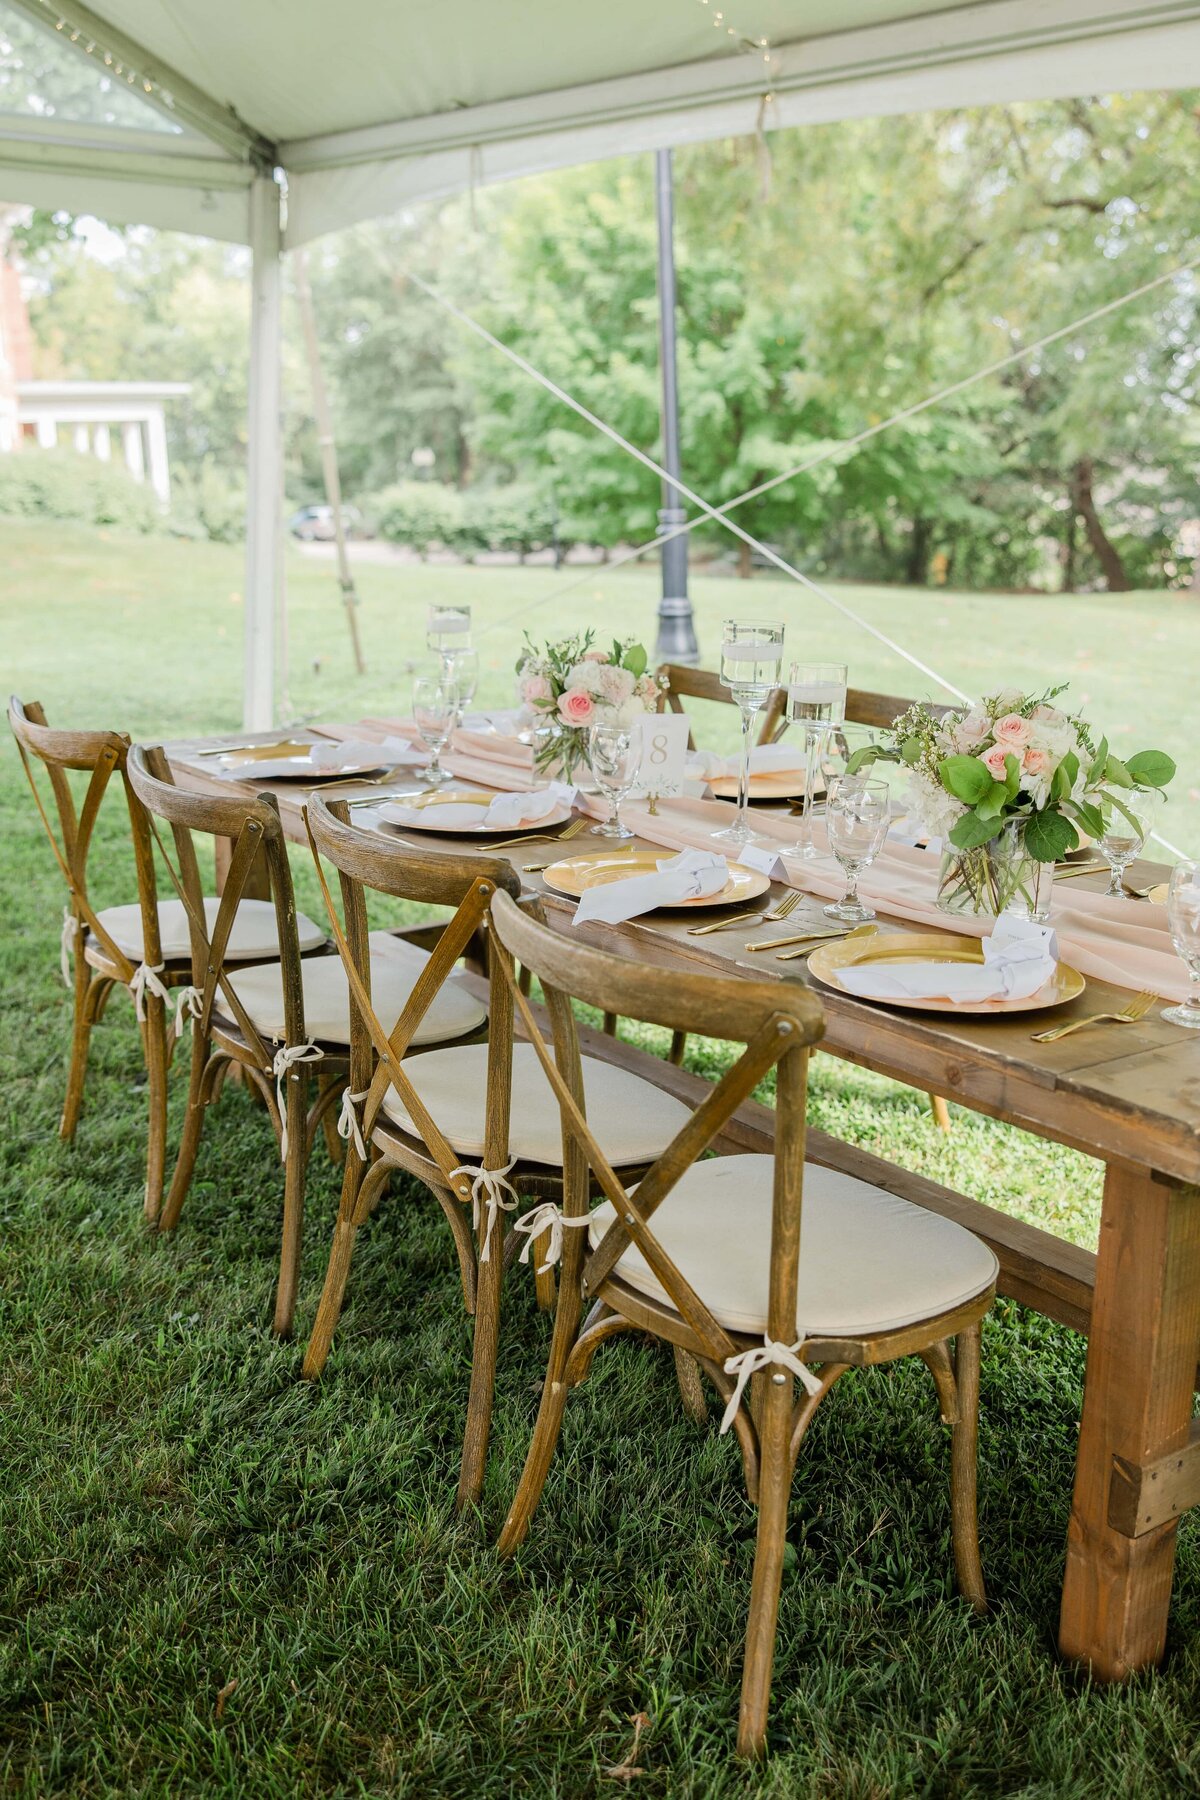 Elegantly set dining table under a tent in the park at Park Farm Winery, complete with wooden chairs, floral centerpieces, and place settings.